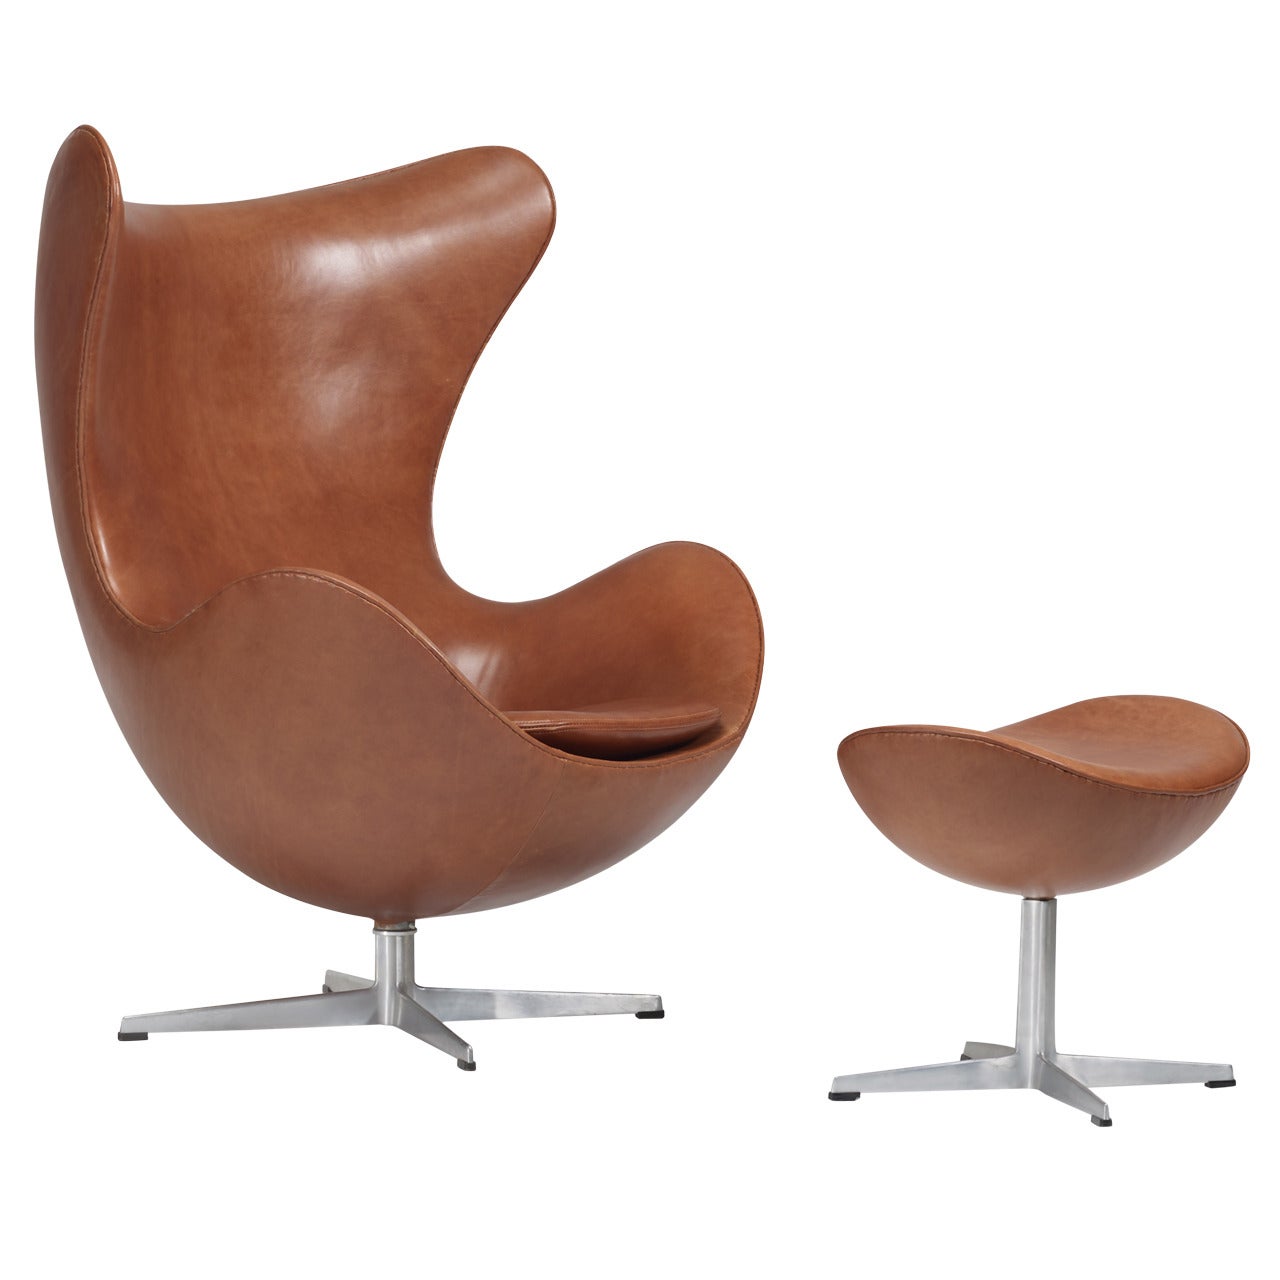 Early Arne Jacobsen Egg Chair and Ottoman for Fritz Hansen, Pair Available